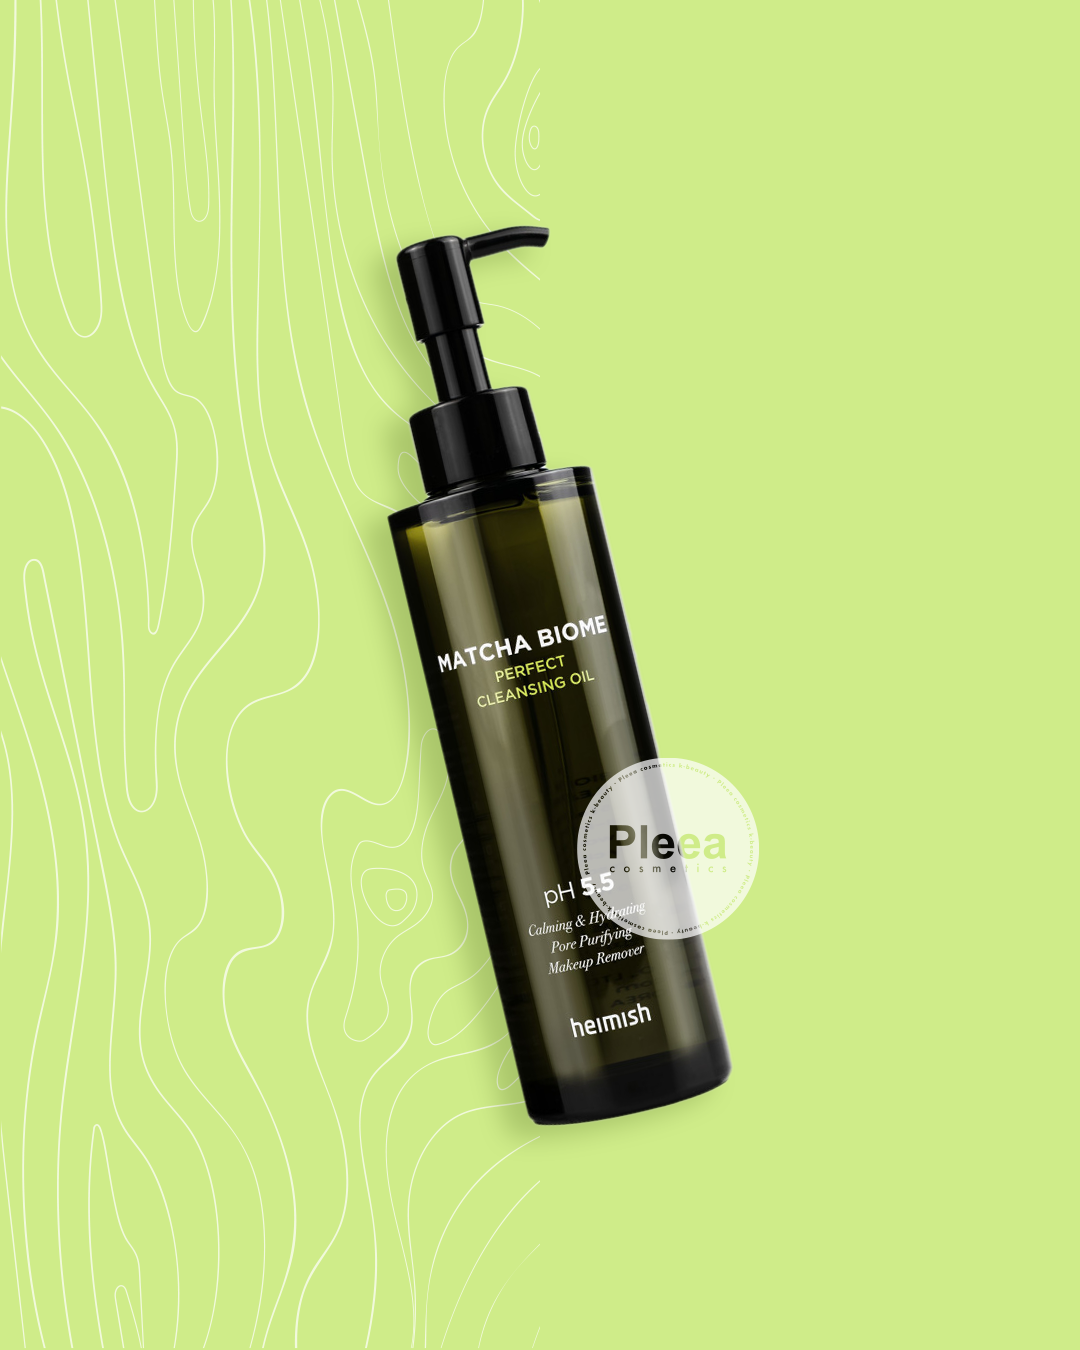 [Heimish] Matcha Biome Perfect Cleansing Oil